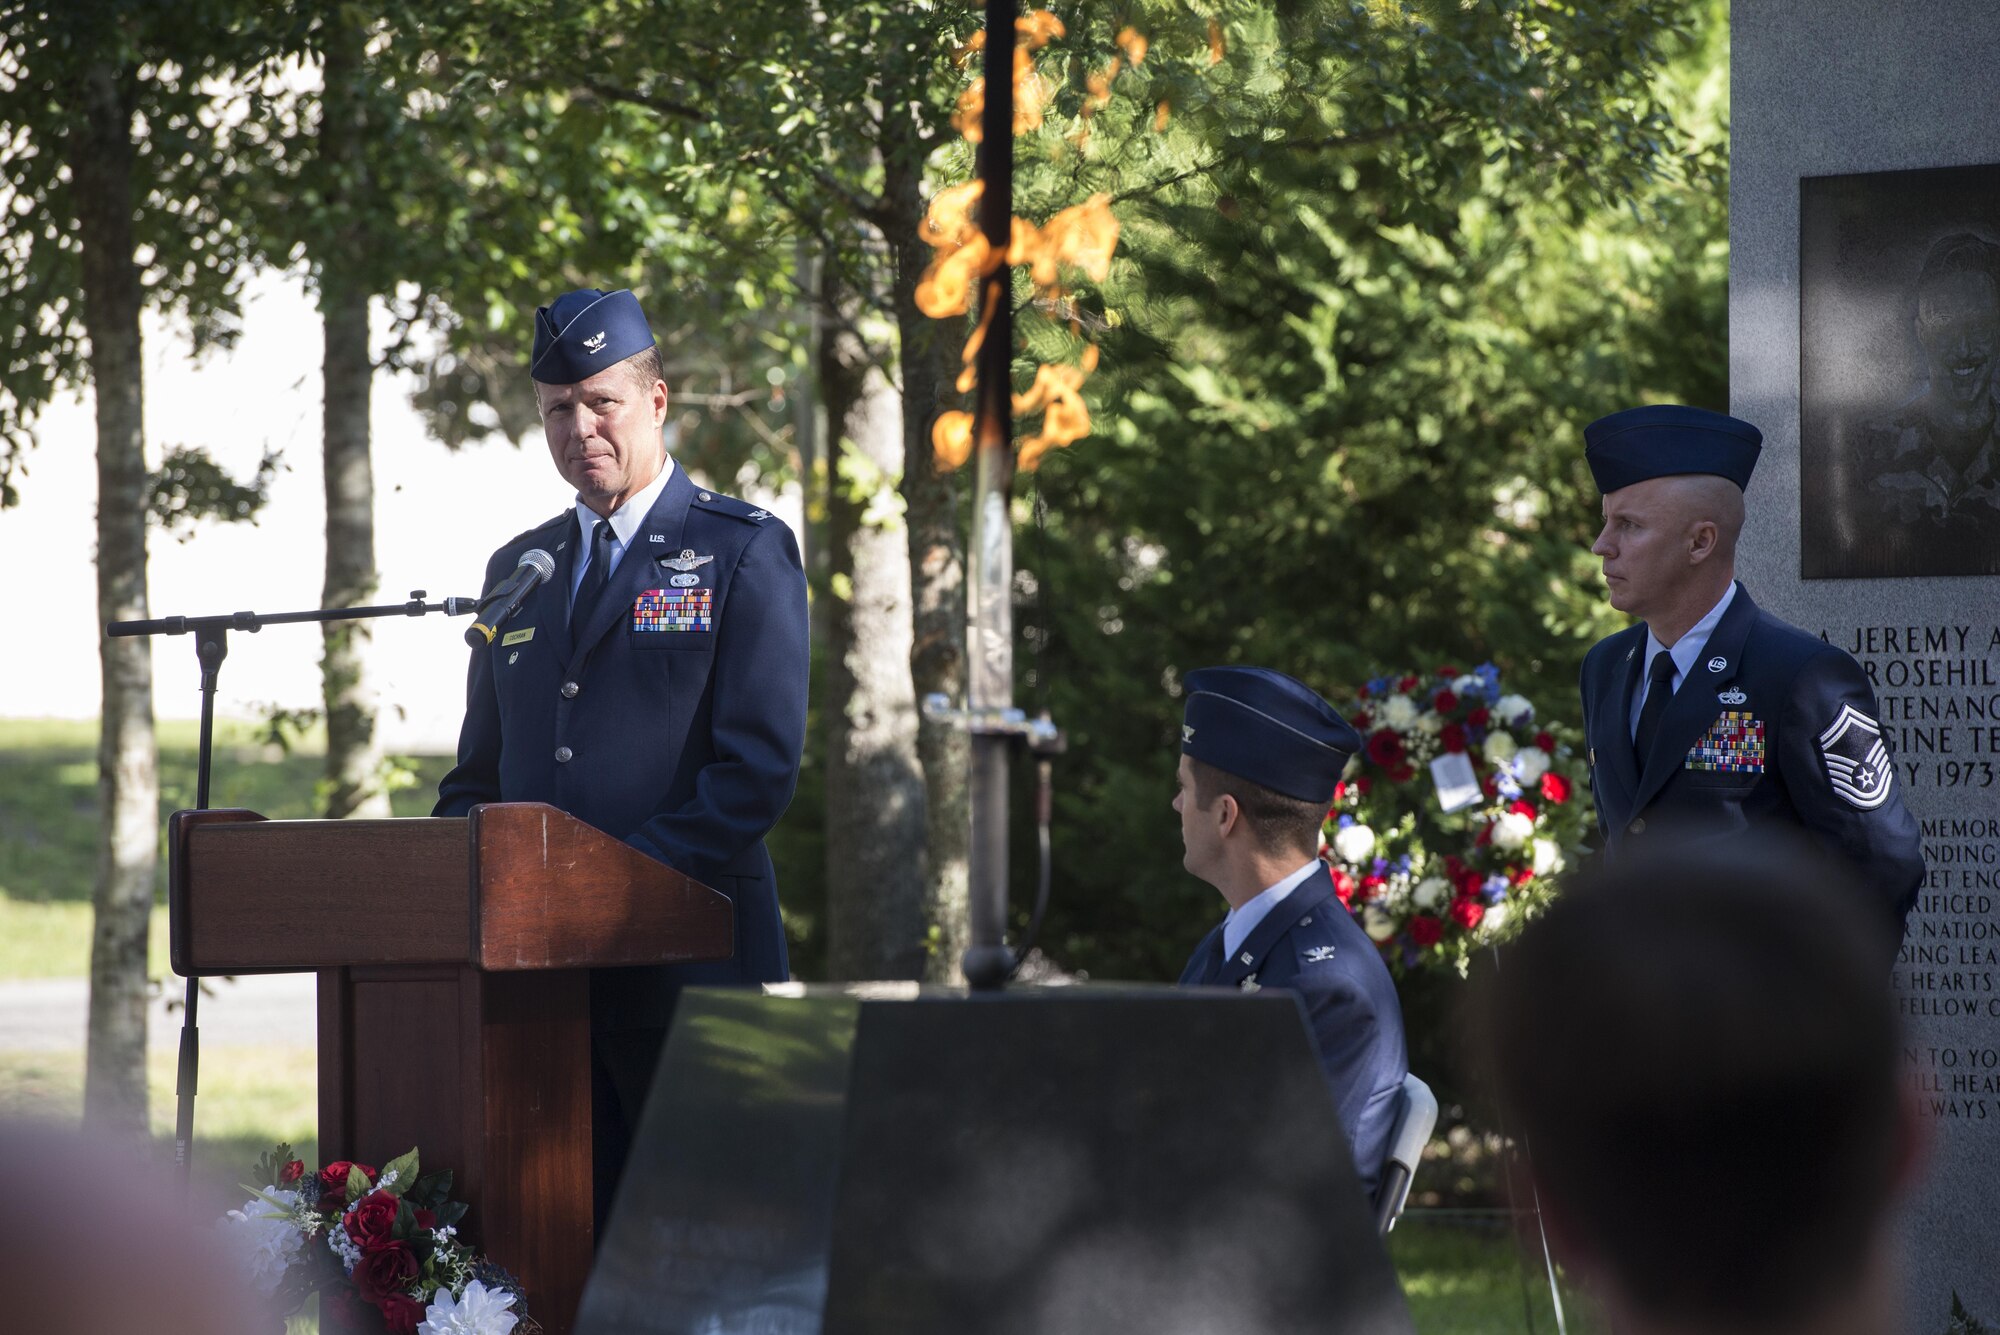 Retired Col. Doug Cochran, commander of the 58th Tactical Fighter Squadron at the time of the Khobar Towers bombing, reflects on his experience from the night of the Khobar Towers terrorist attack June 24, 2016, during the Khobar Towers Memorial Ceremony at Eglin Air Force Base, Fla. The June 25, 1996, bombing at Khobar Towers in Dhahran, Saudi Arabia, resulted in more than 500 civilian and military casualties. The 33rd FW suffered 105 wounded personnel and accounted for 12 of the 19 Airmen killed on that day. (U.S. Air Force photo by Senior Airman Stormy Archer/Released)